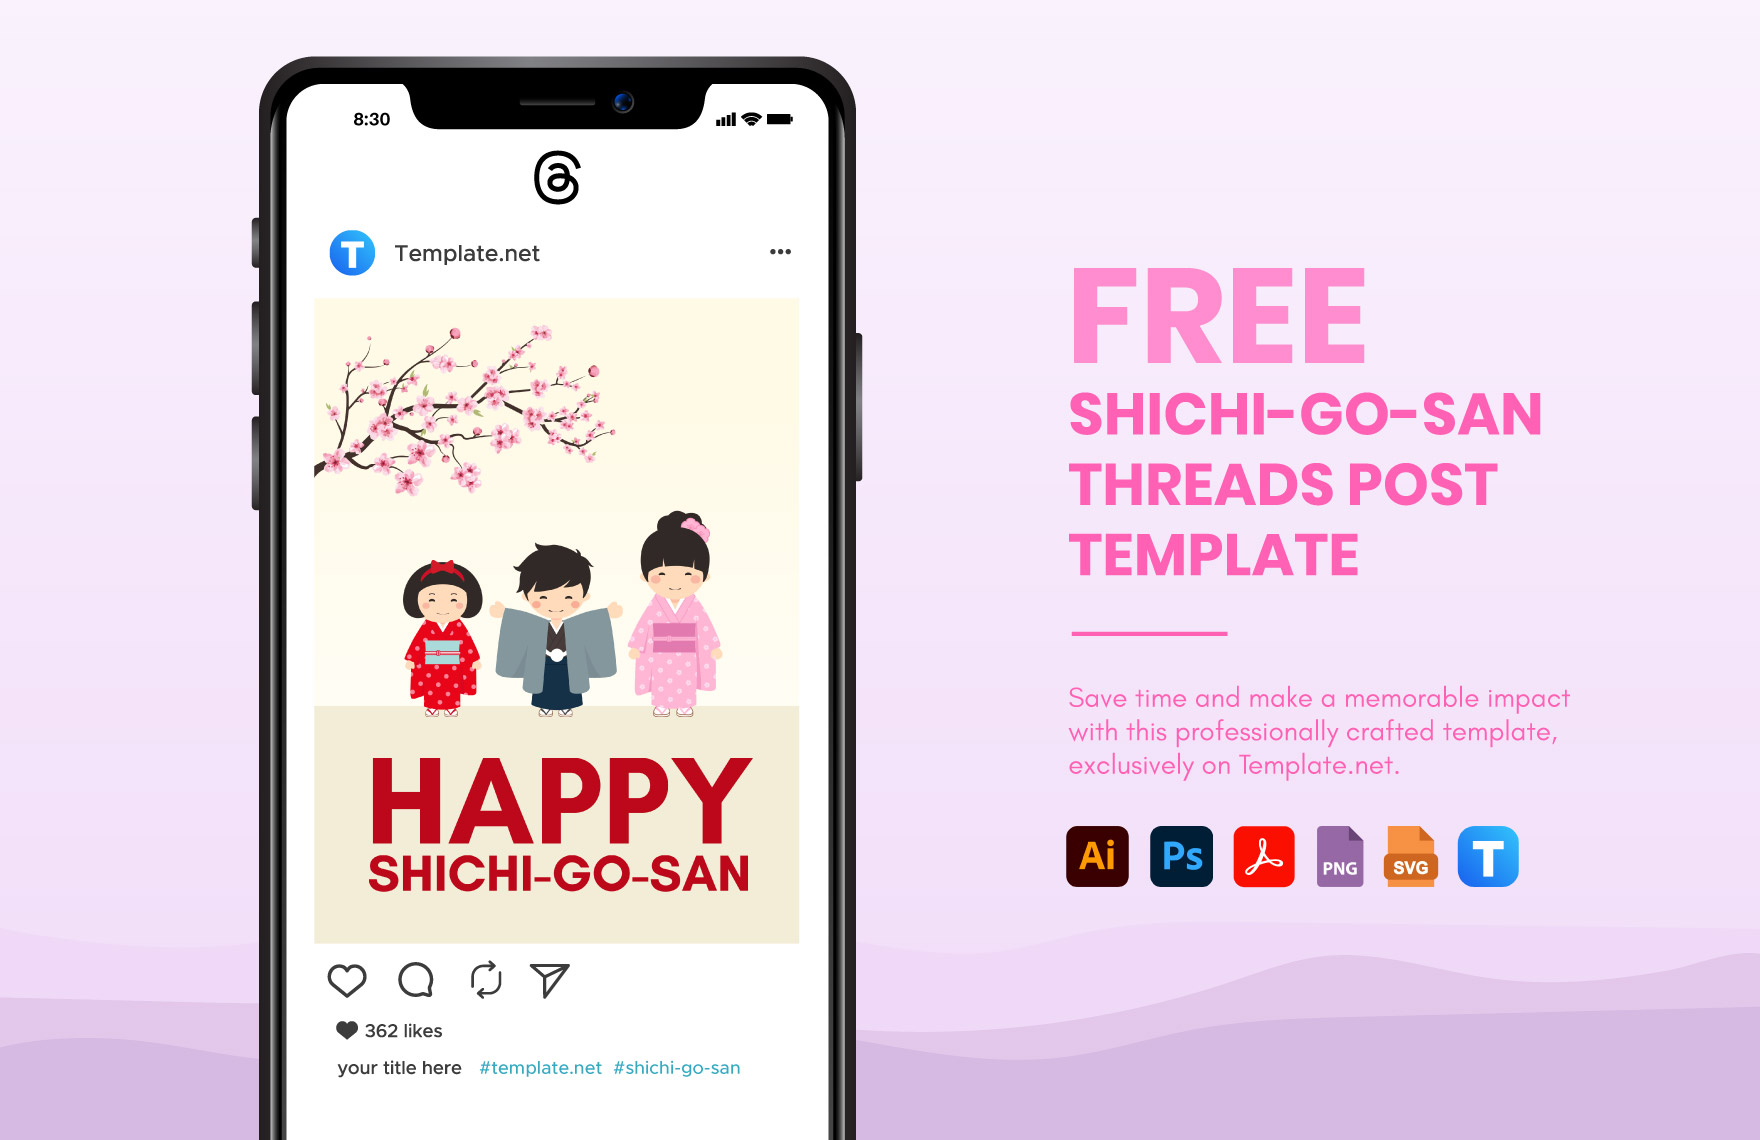 Free Shichi-Go-San Threads Post Template in PDF, Illustrator, PSD, SVG, PNG